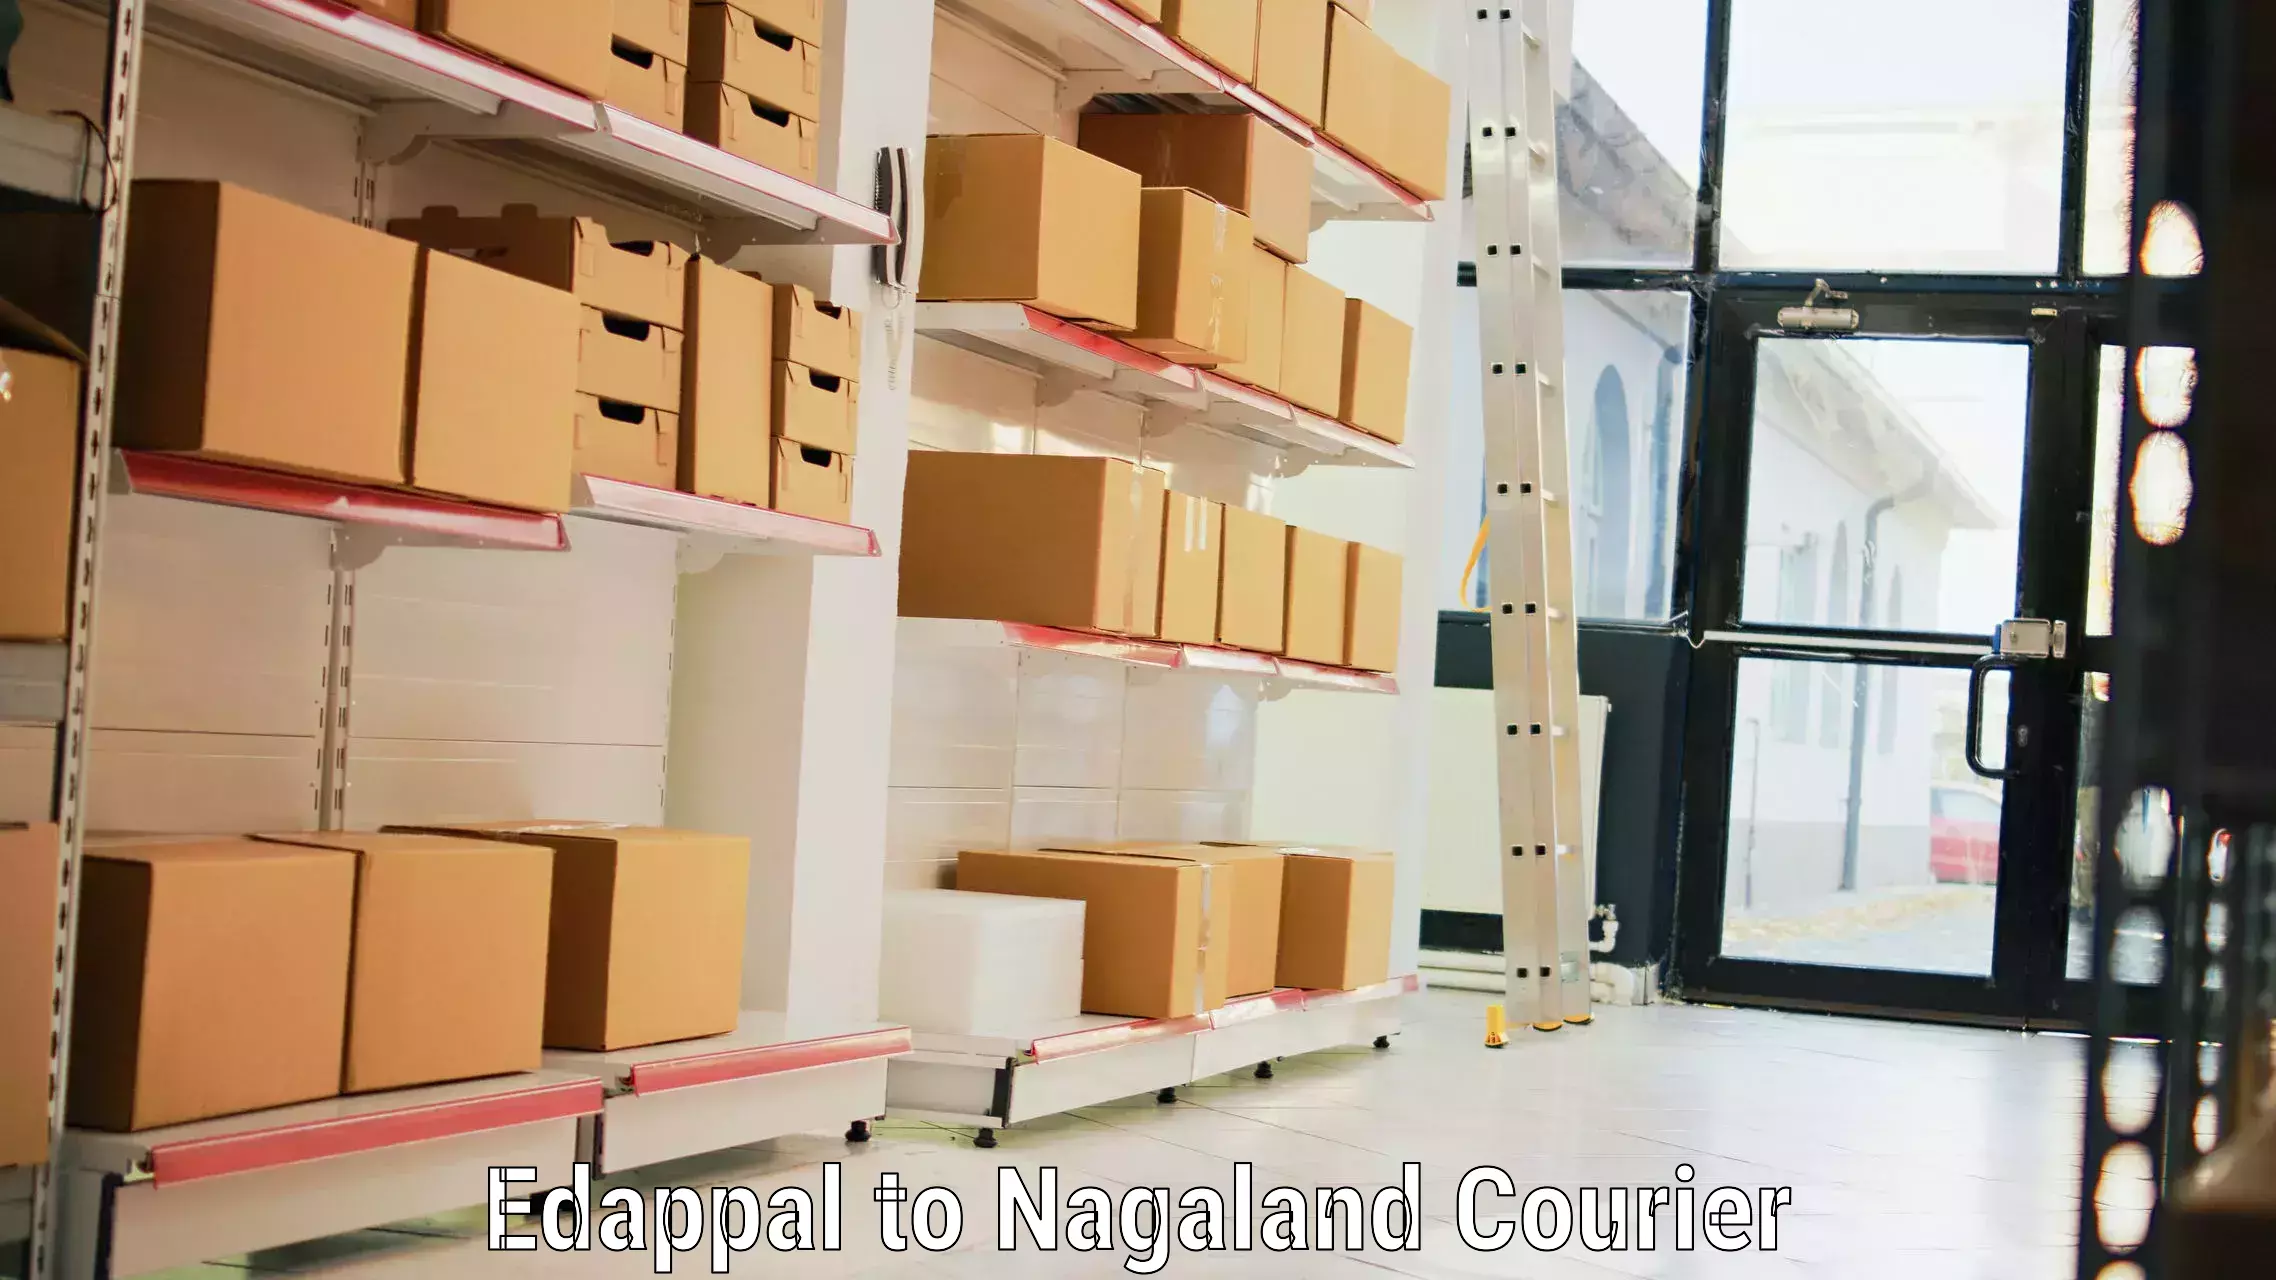 Instant baggage transport quote Edappal to NIT Nagaland